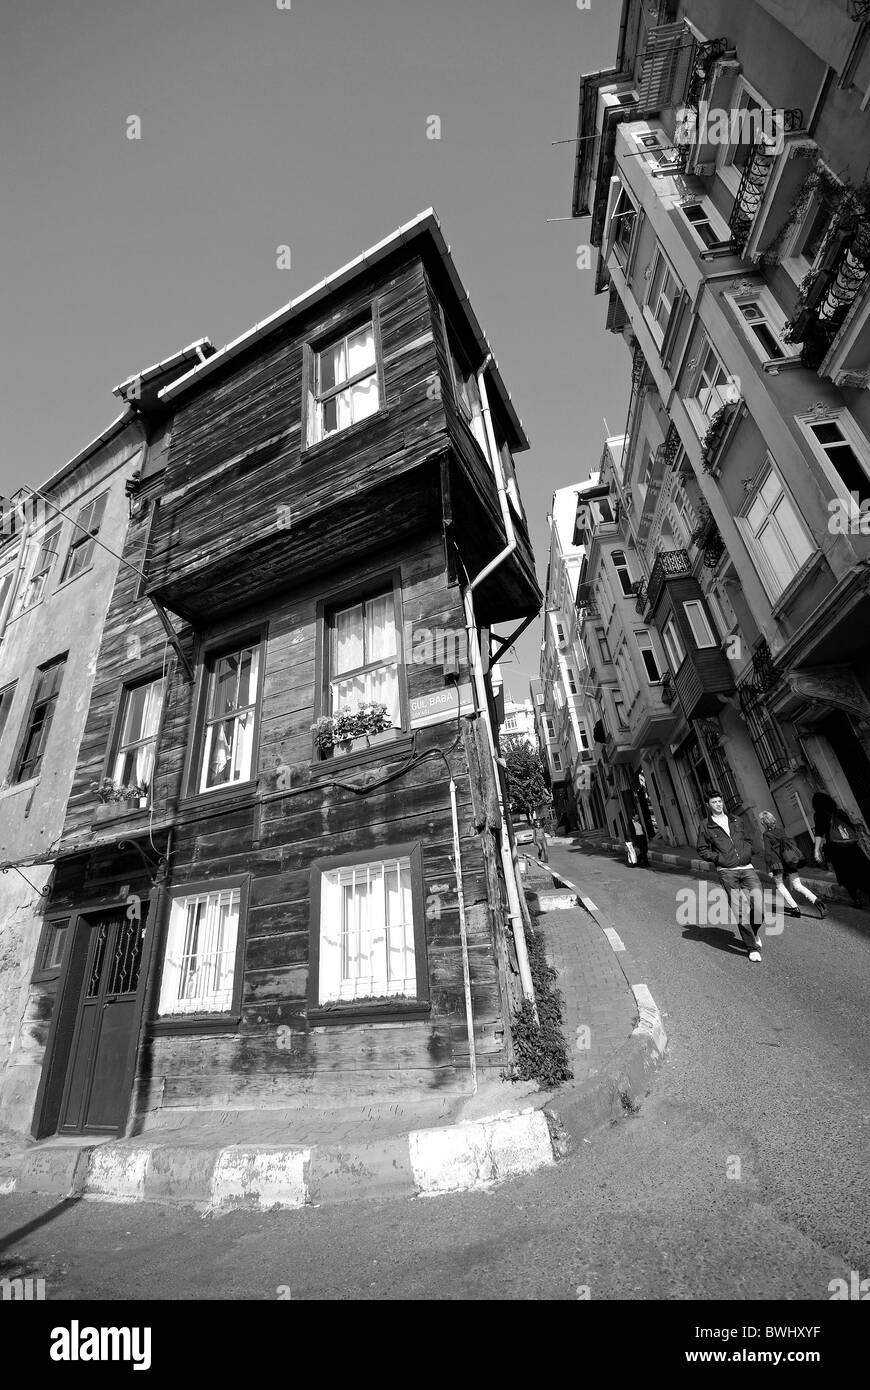 ISTANBUL, TURKEY. A traditional wooden house on a street in Beyoglu between Galatasaray and Tophane. Autumn 2010. Stock Photo